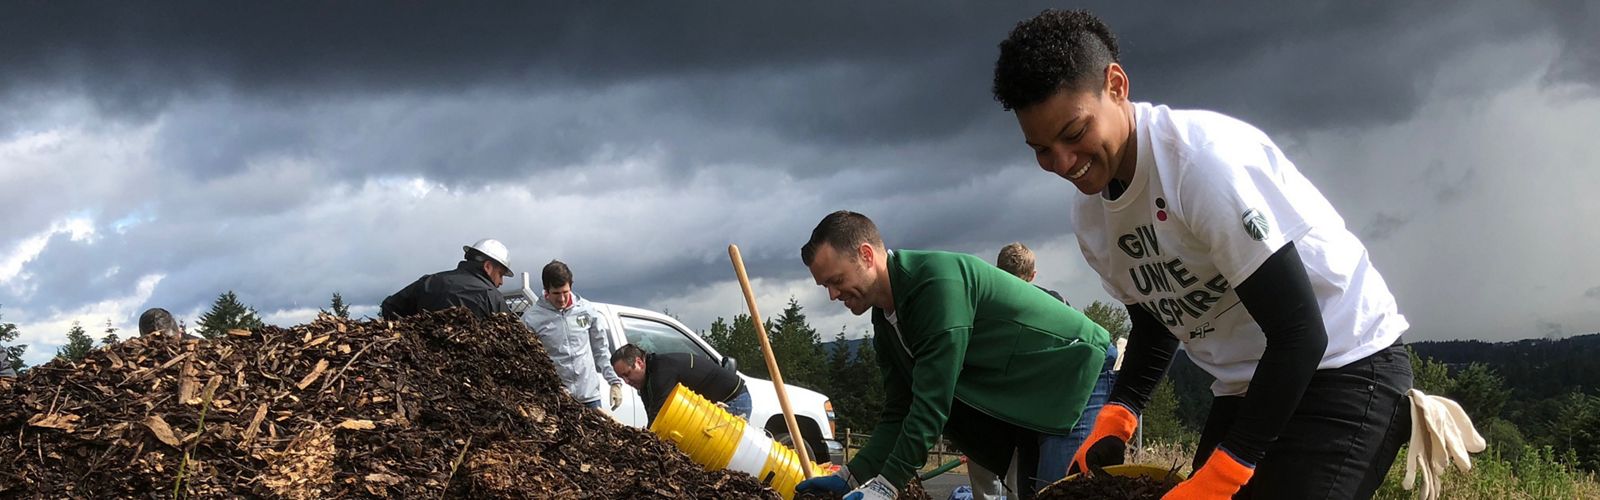 Volunteers helping to restore Powell Butte Natural Area in Portland, Oregon.